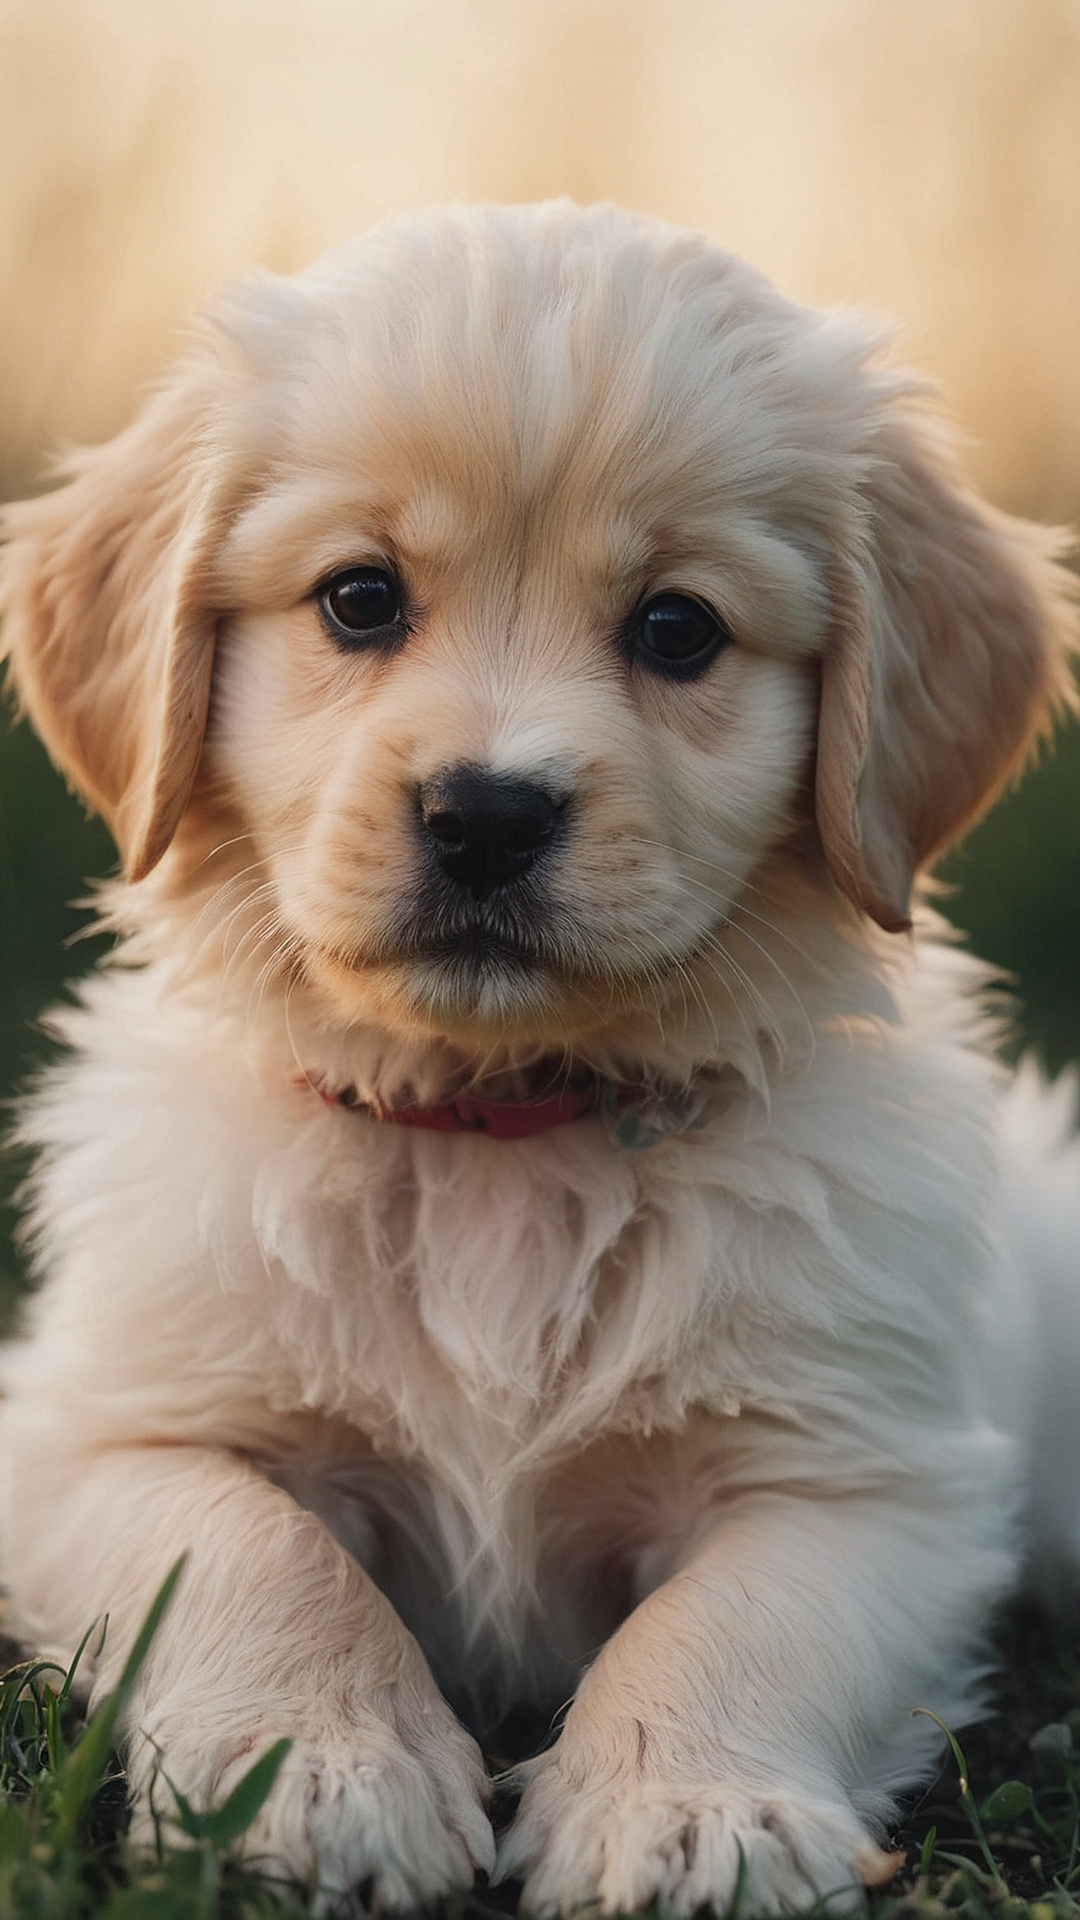 Puppy Pals: The Fluffiest Friends